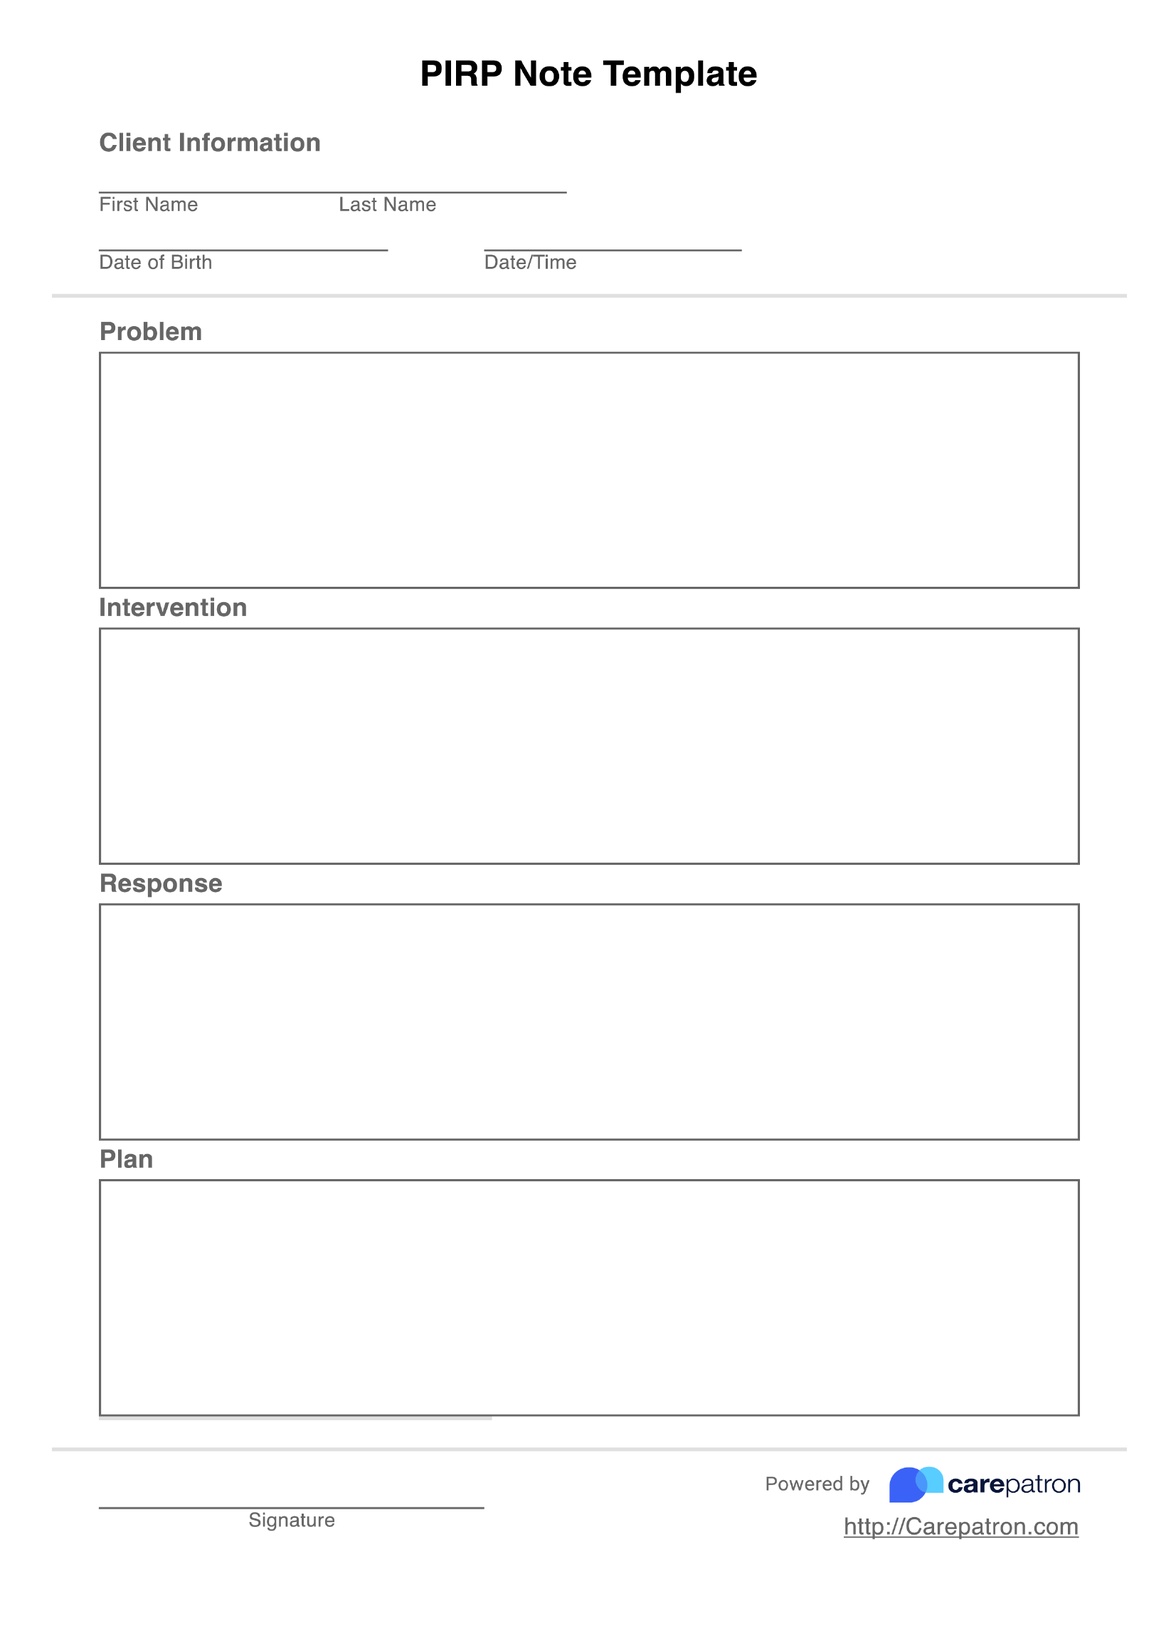 PIRP Notes Template PDF Example